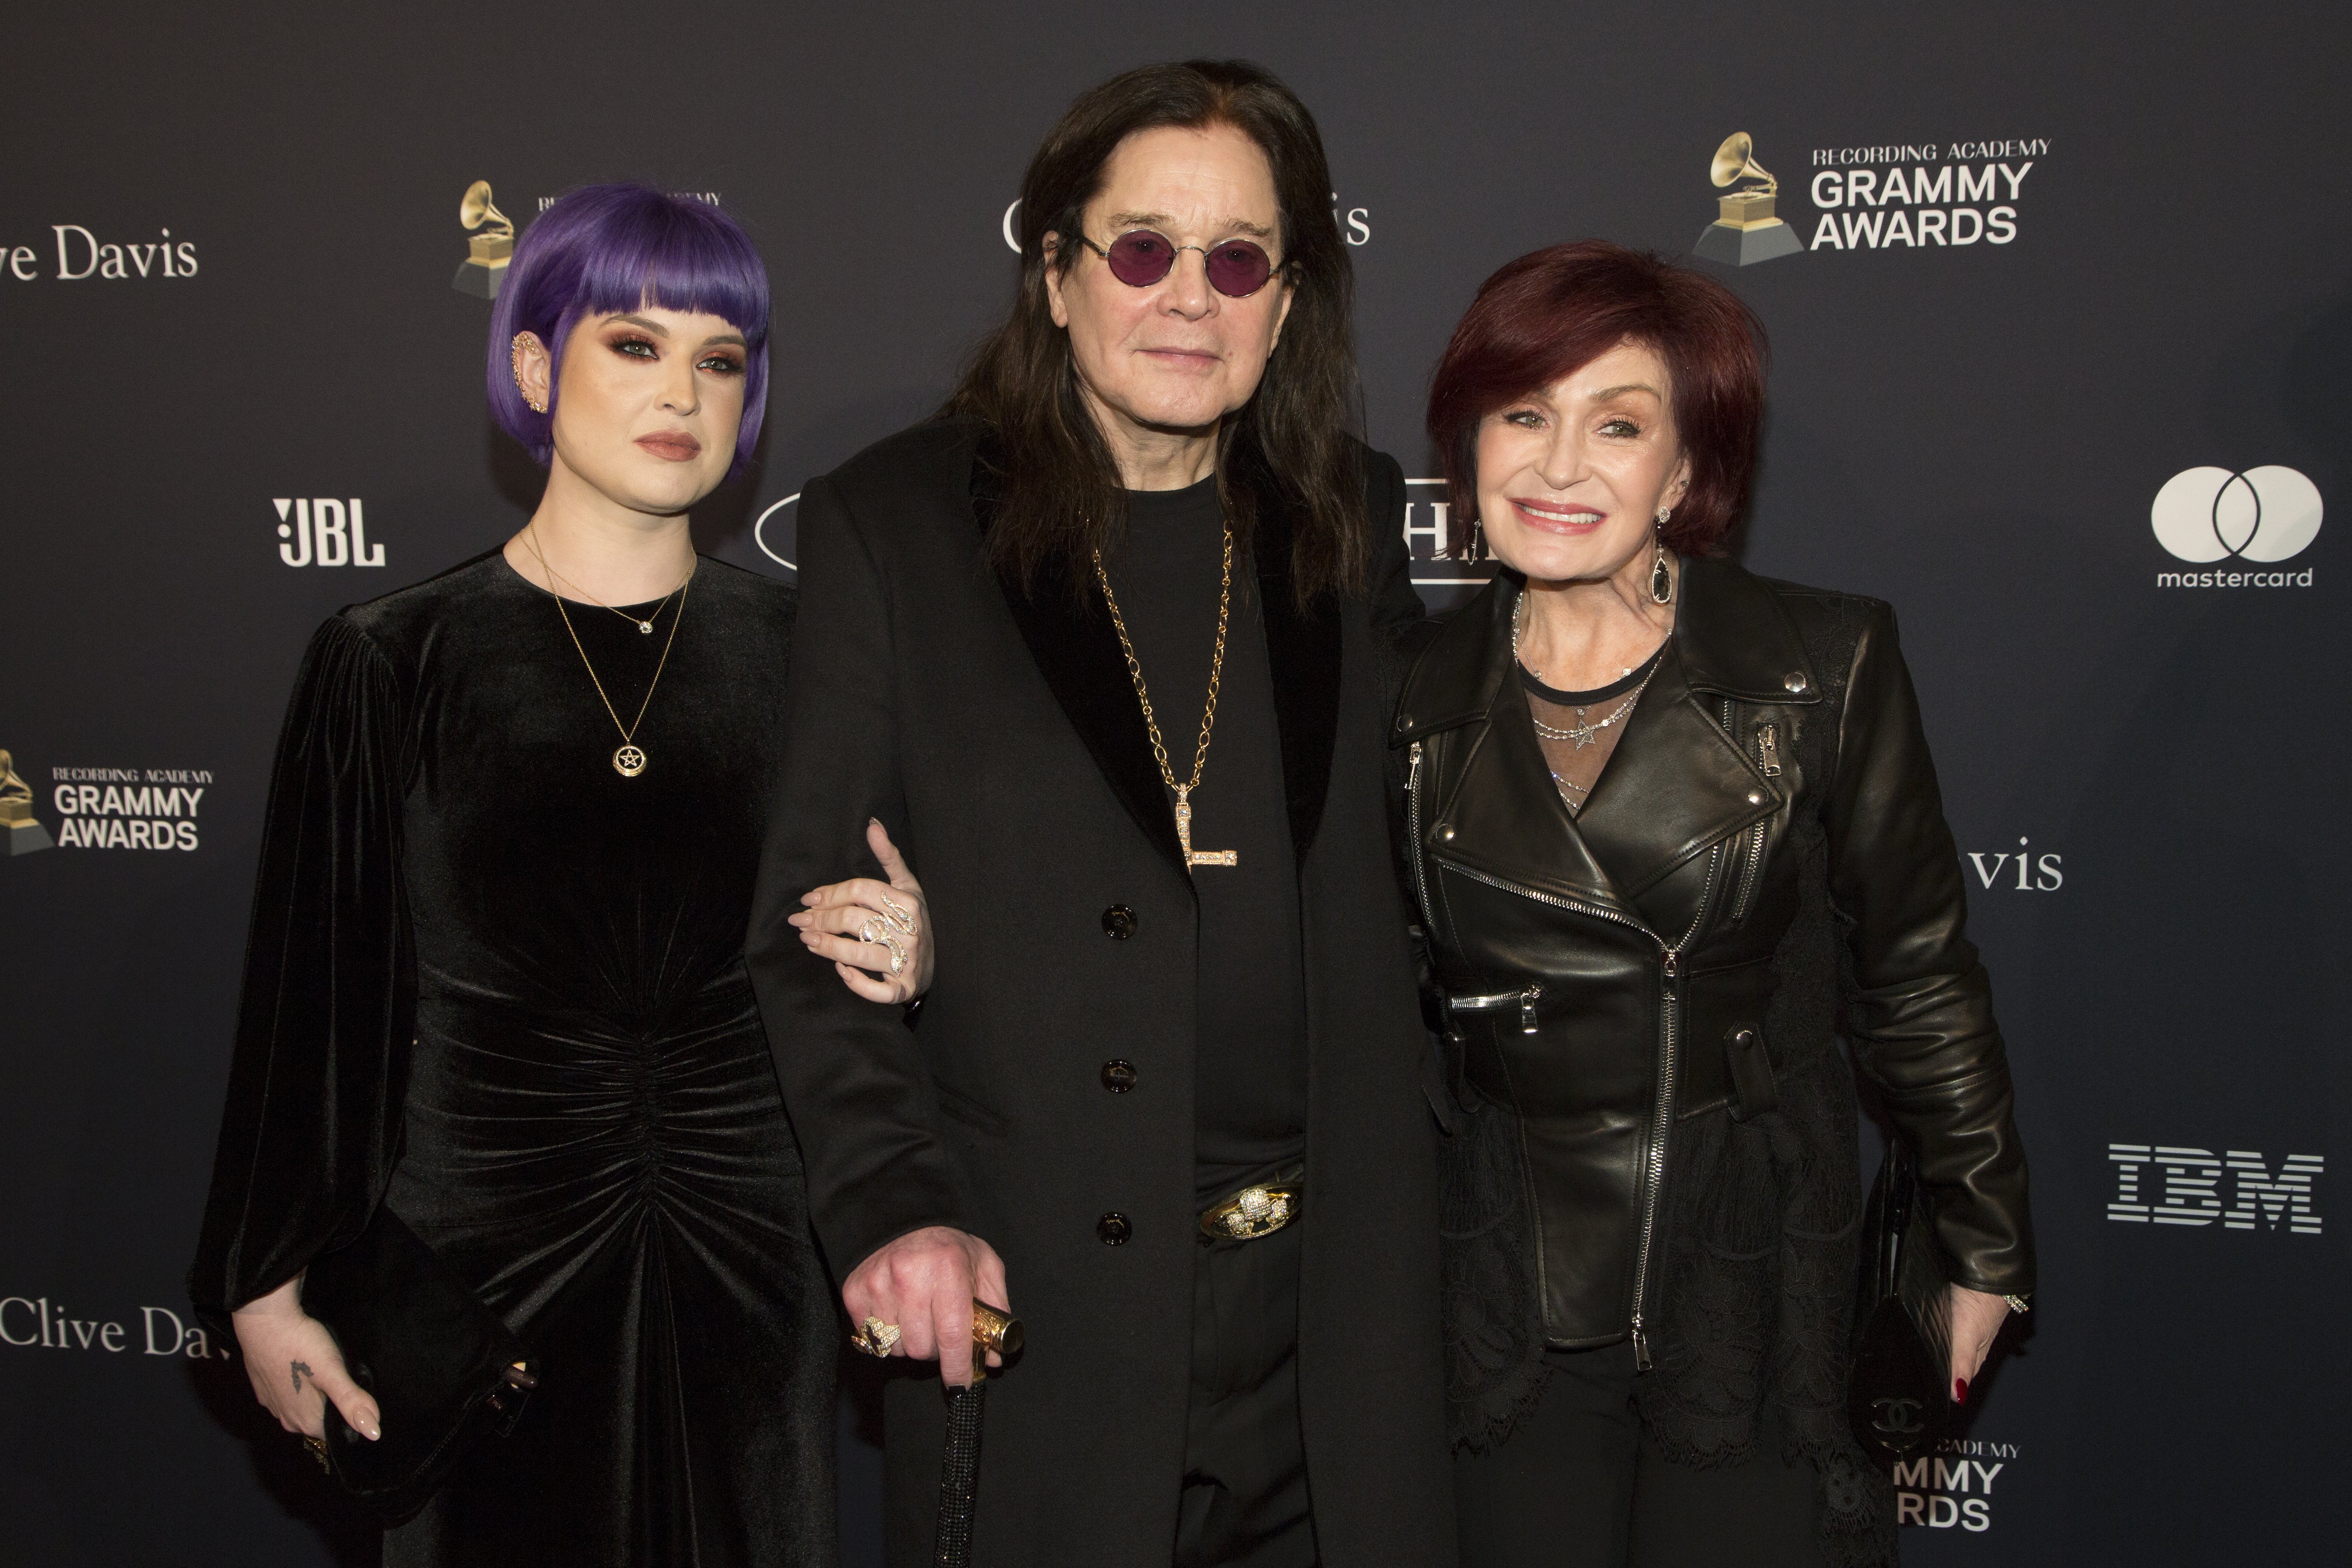 TV personality Kelly Osbourne, singer Ozzy Osbourne and talk show host Sharon Osbourne attend the Pre-Grammy Gala and Grammy Salute at The Beverly Hilton Hotel on January 25, 2020 in Beverly Hills, California ┃Source: Getty Images